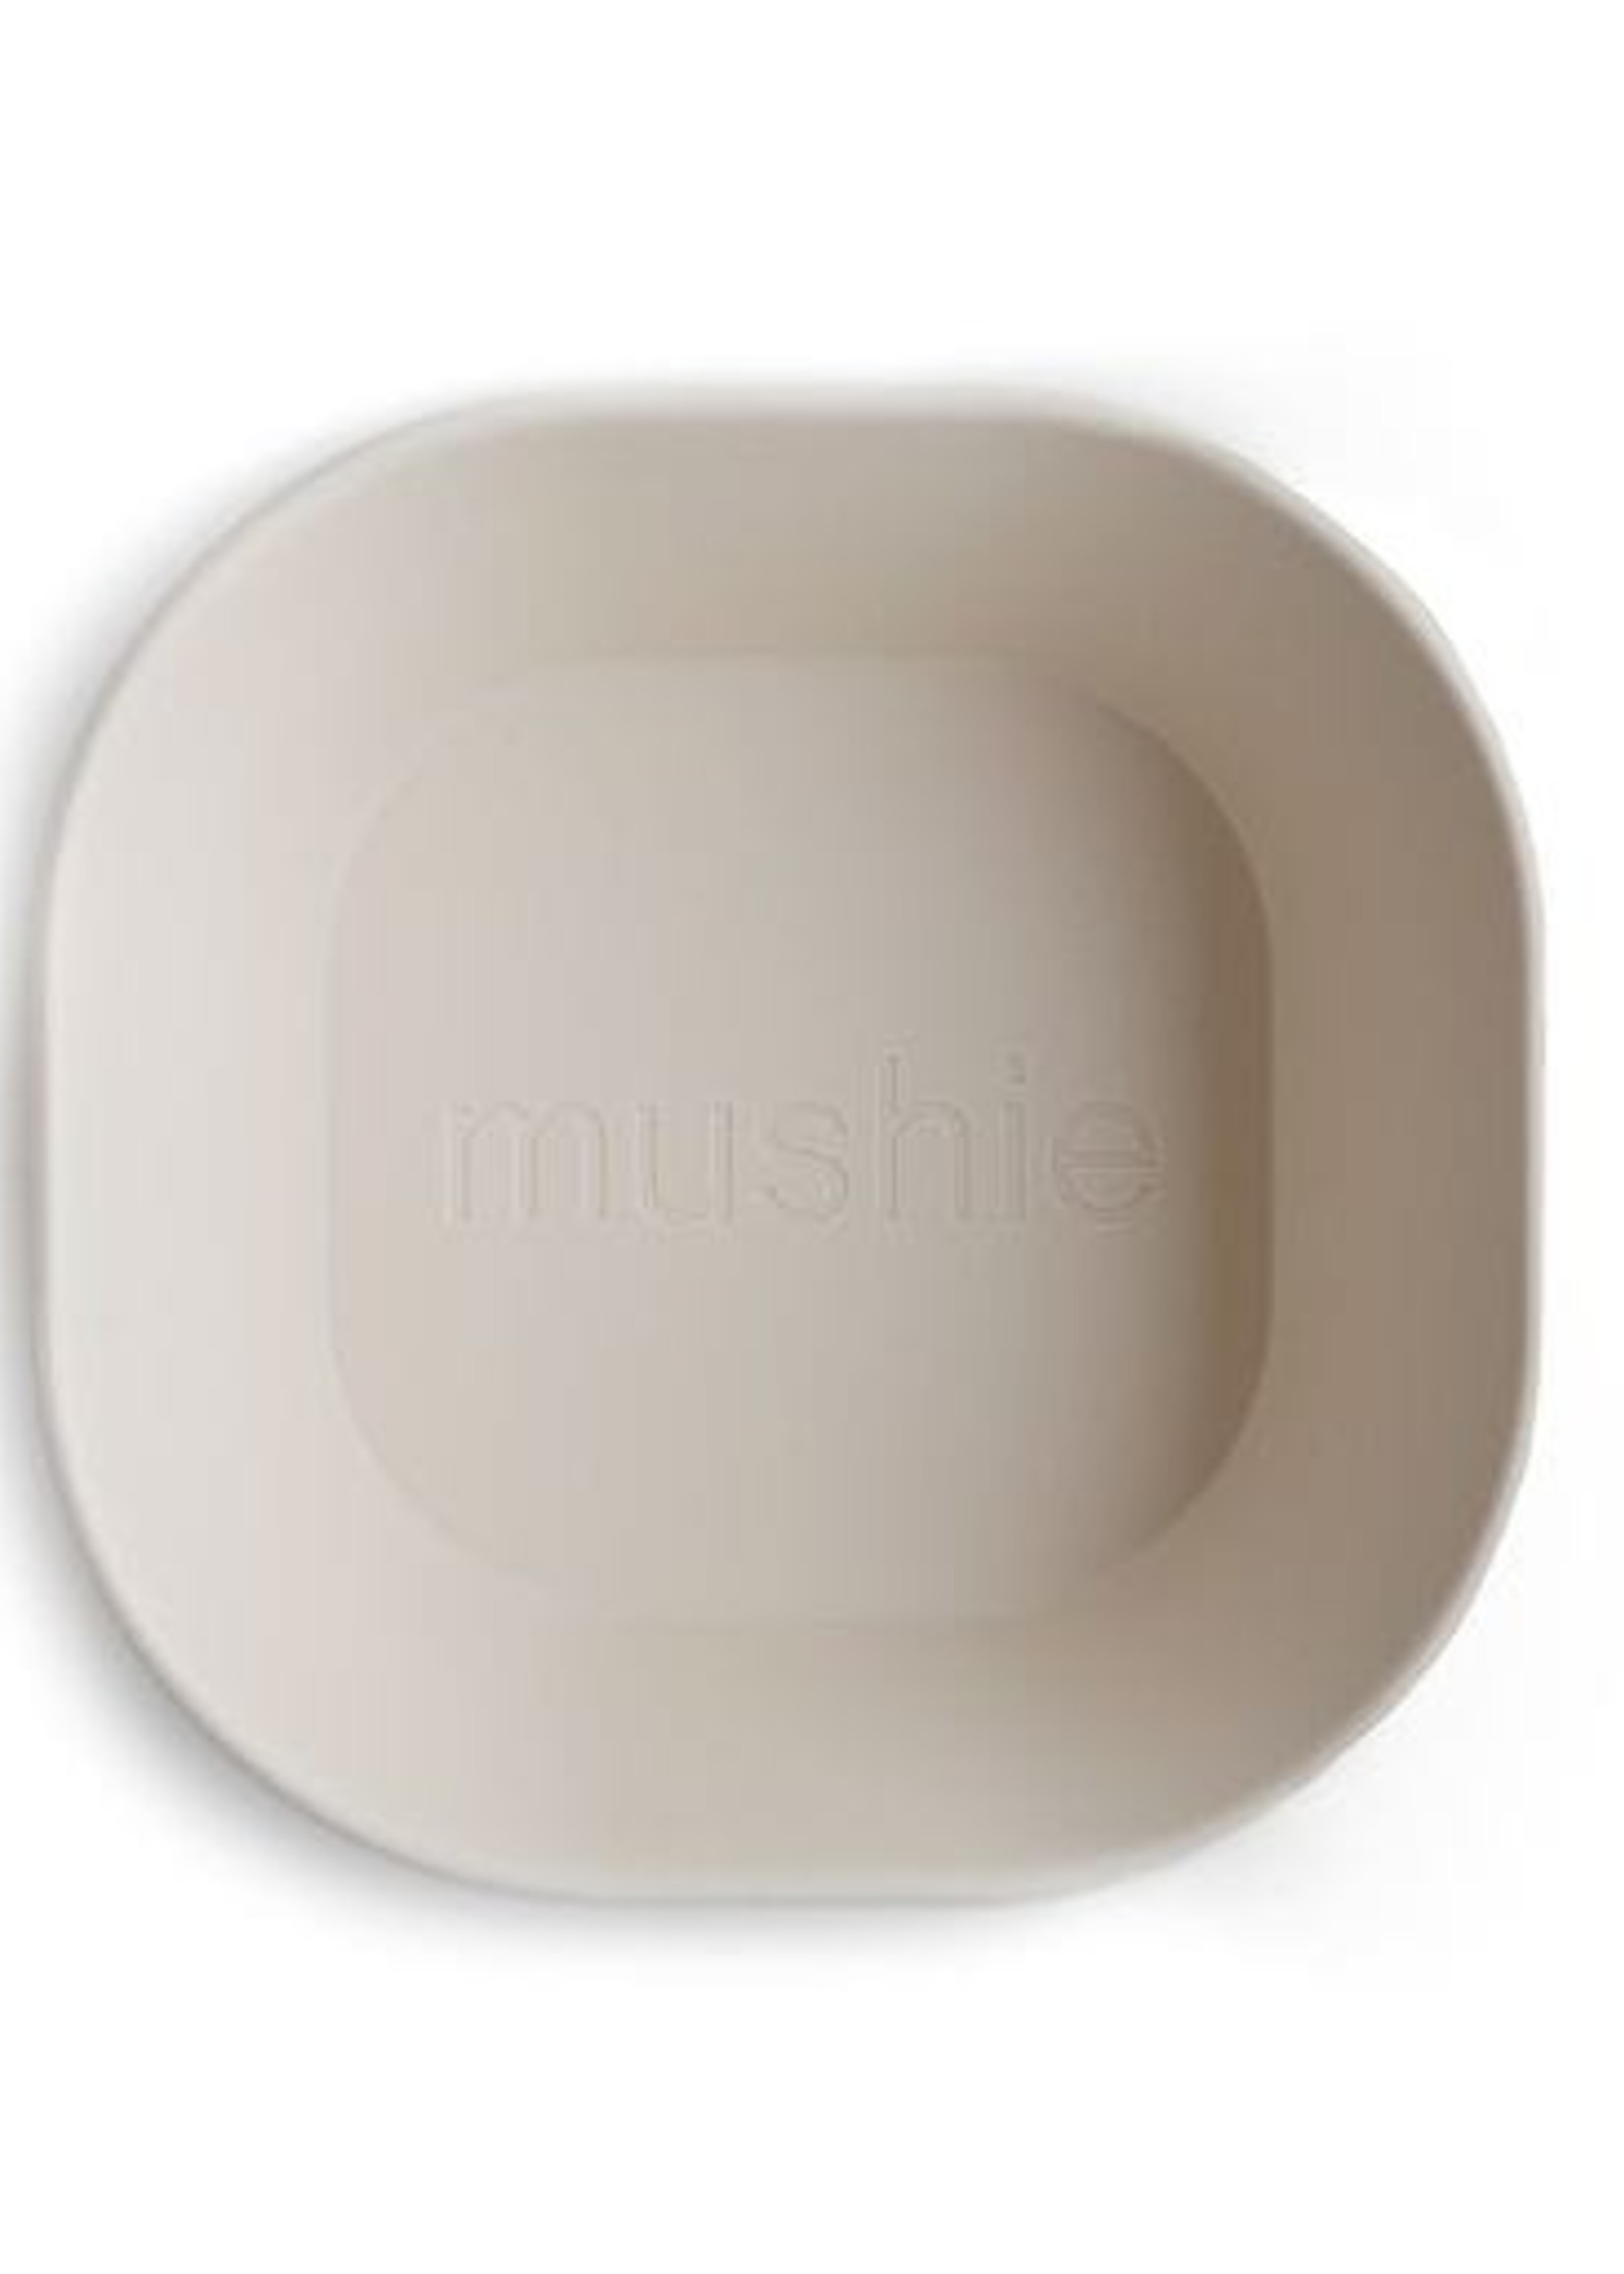 Lilaa Concepts 1329 Mushie bowl ivory